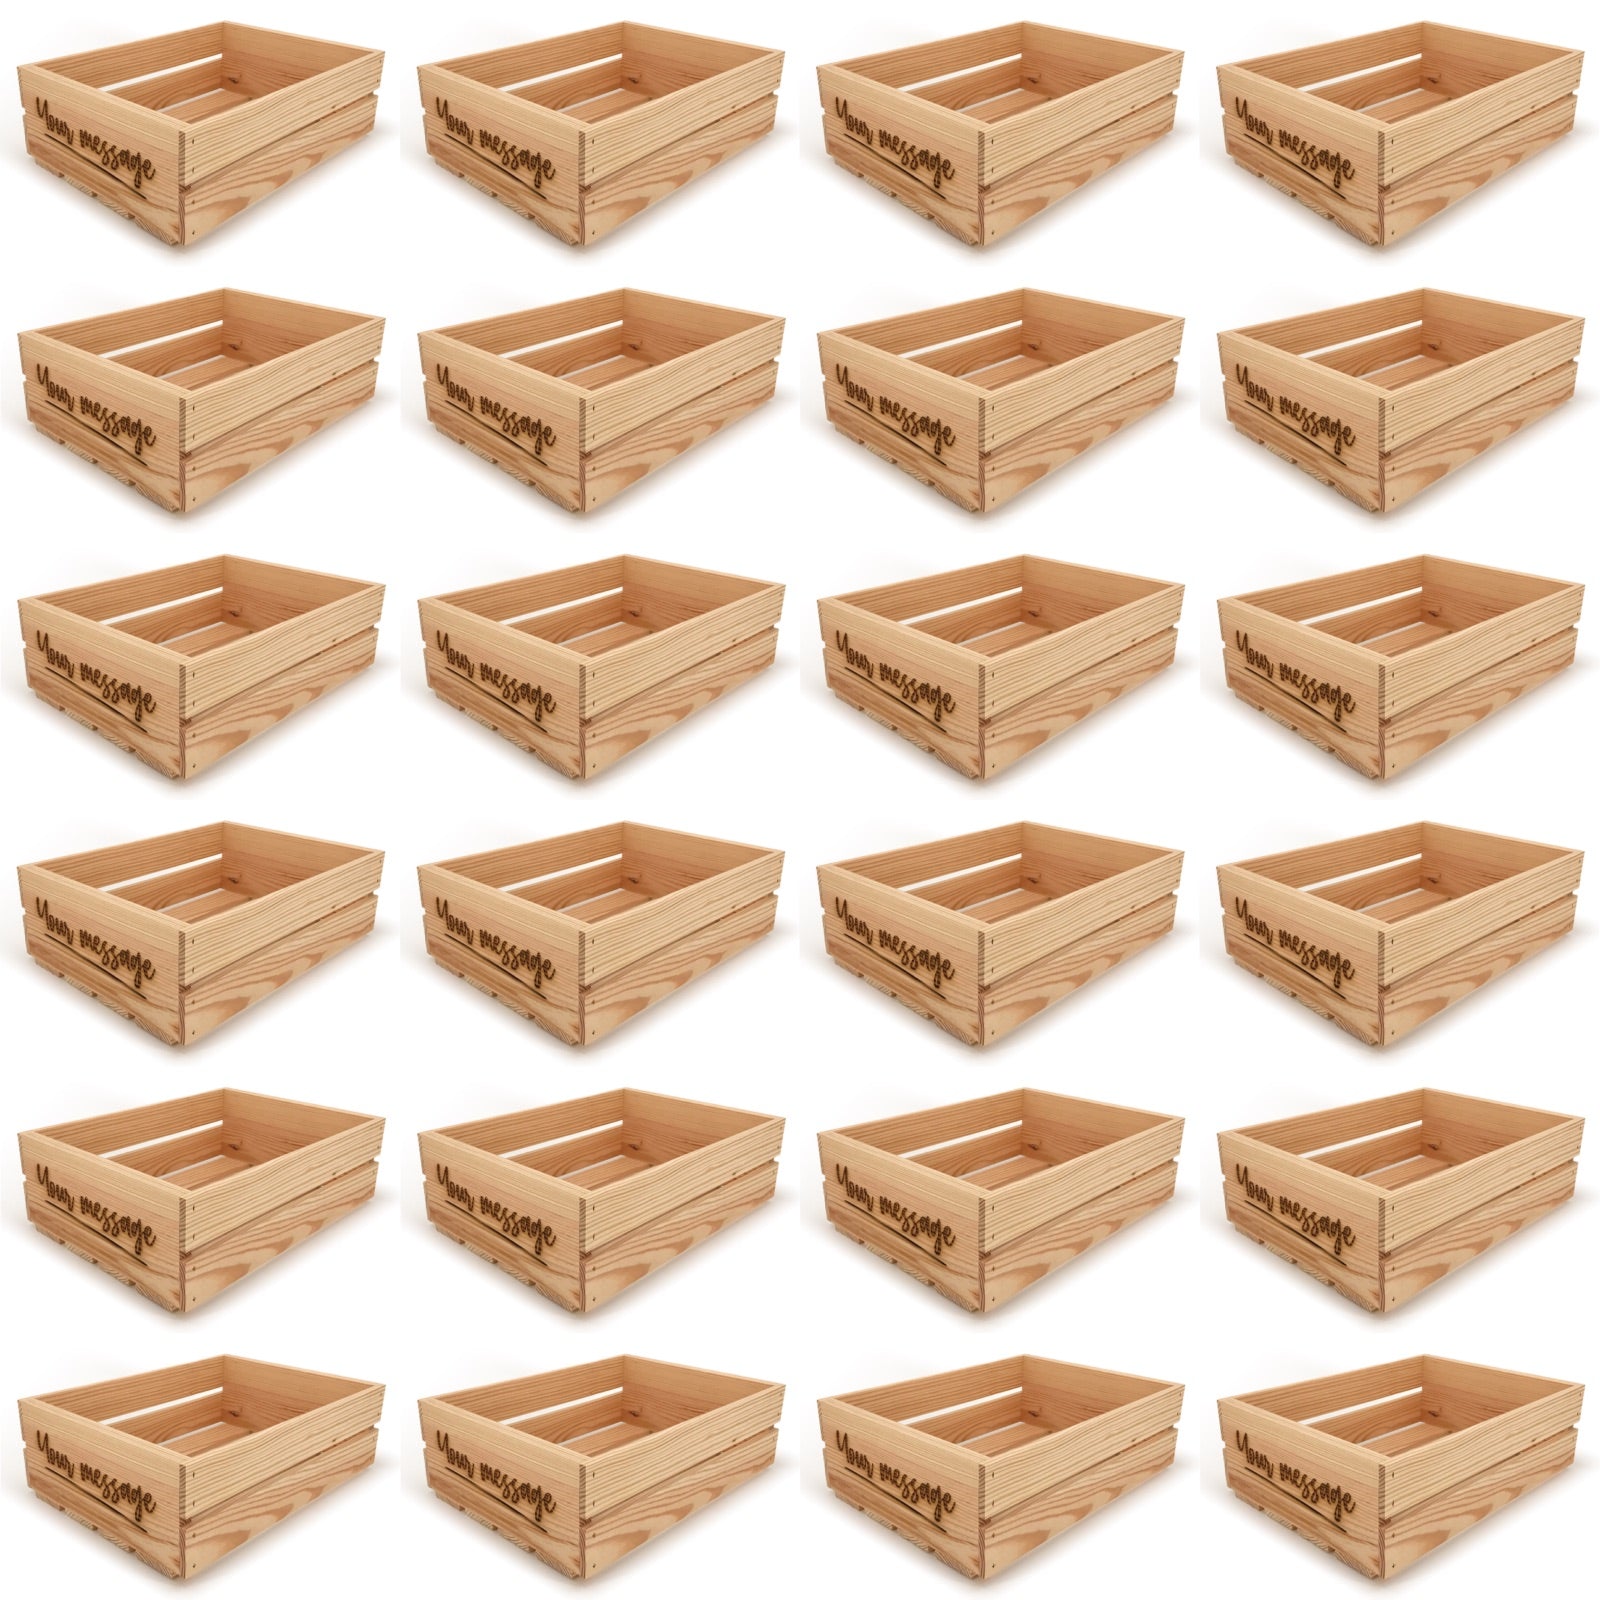 24 Small wooden crates with custom message 16x12x5.25, 6-WS-16-12-5.25-ST-NW-NL, 12-WS-16-12-5.25-ST-NW-NL, 24-WS-16-12-5.25-ST-NW-NL, 48-WS-16-12-5.25-ST-NW-NL, 96-WS-16-12-5.25-ST-NW-NL